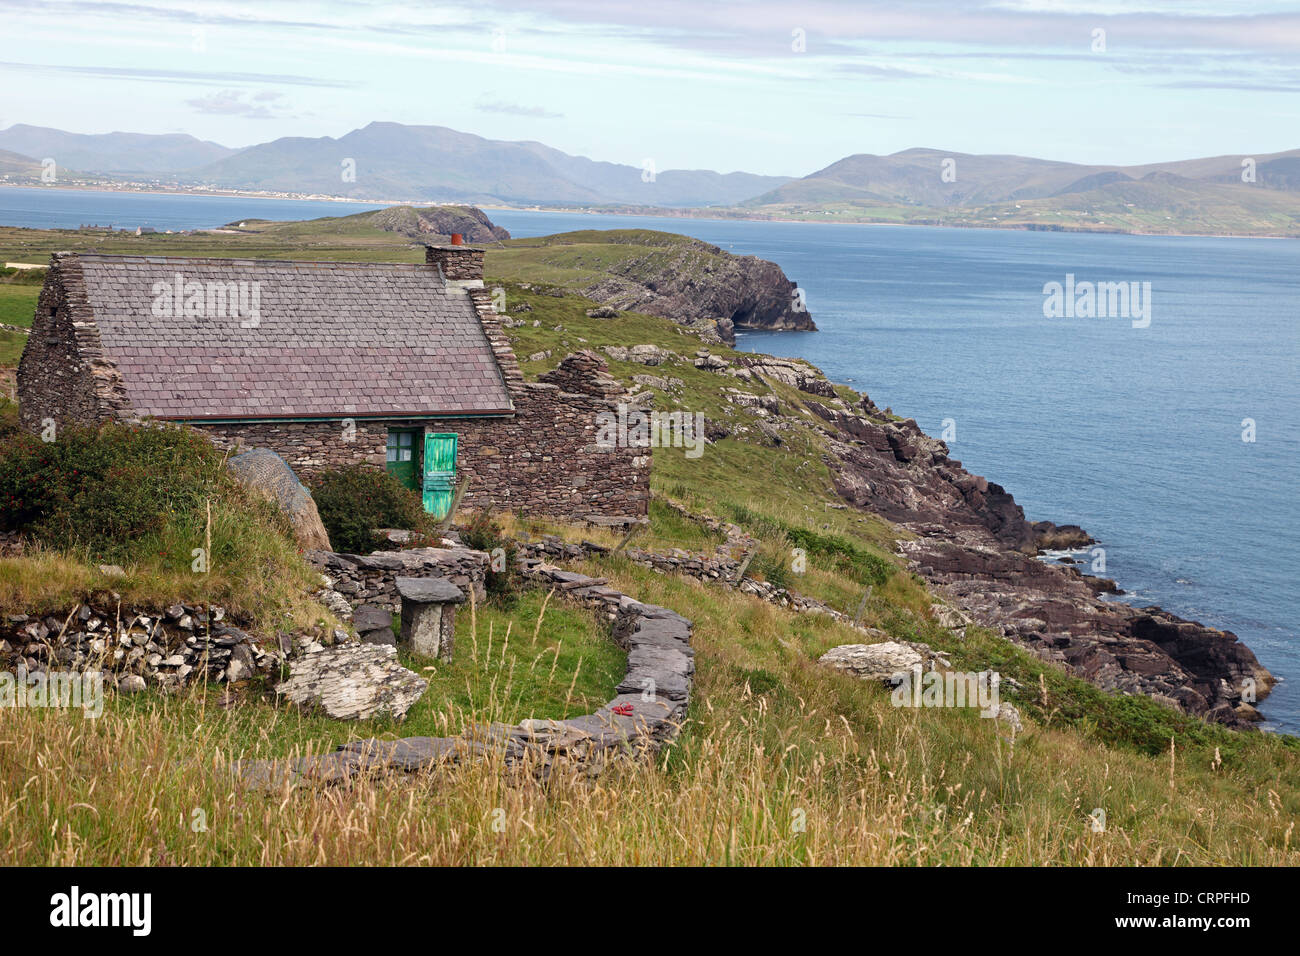 Cill Rialaig, an 18th century village destined for demolition before being rescued by arts patron Noelle Campbell Sharpe and res Stock Photo